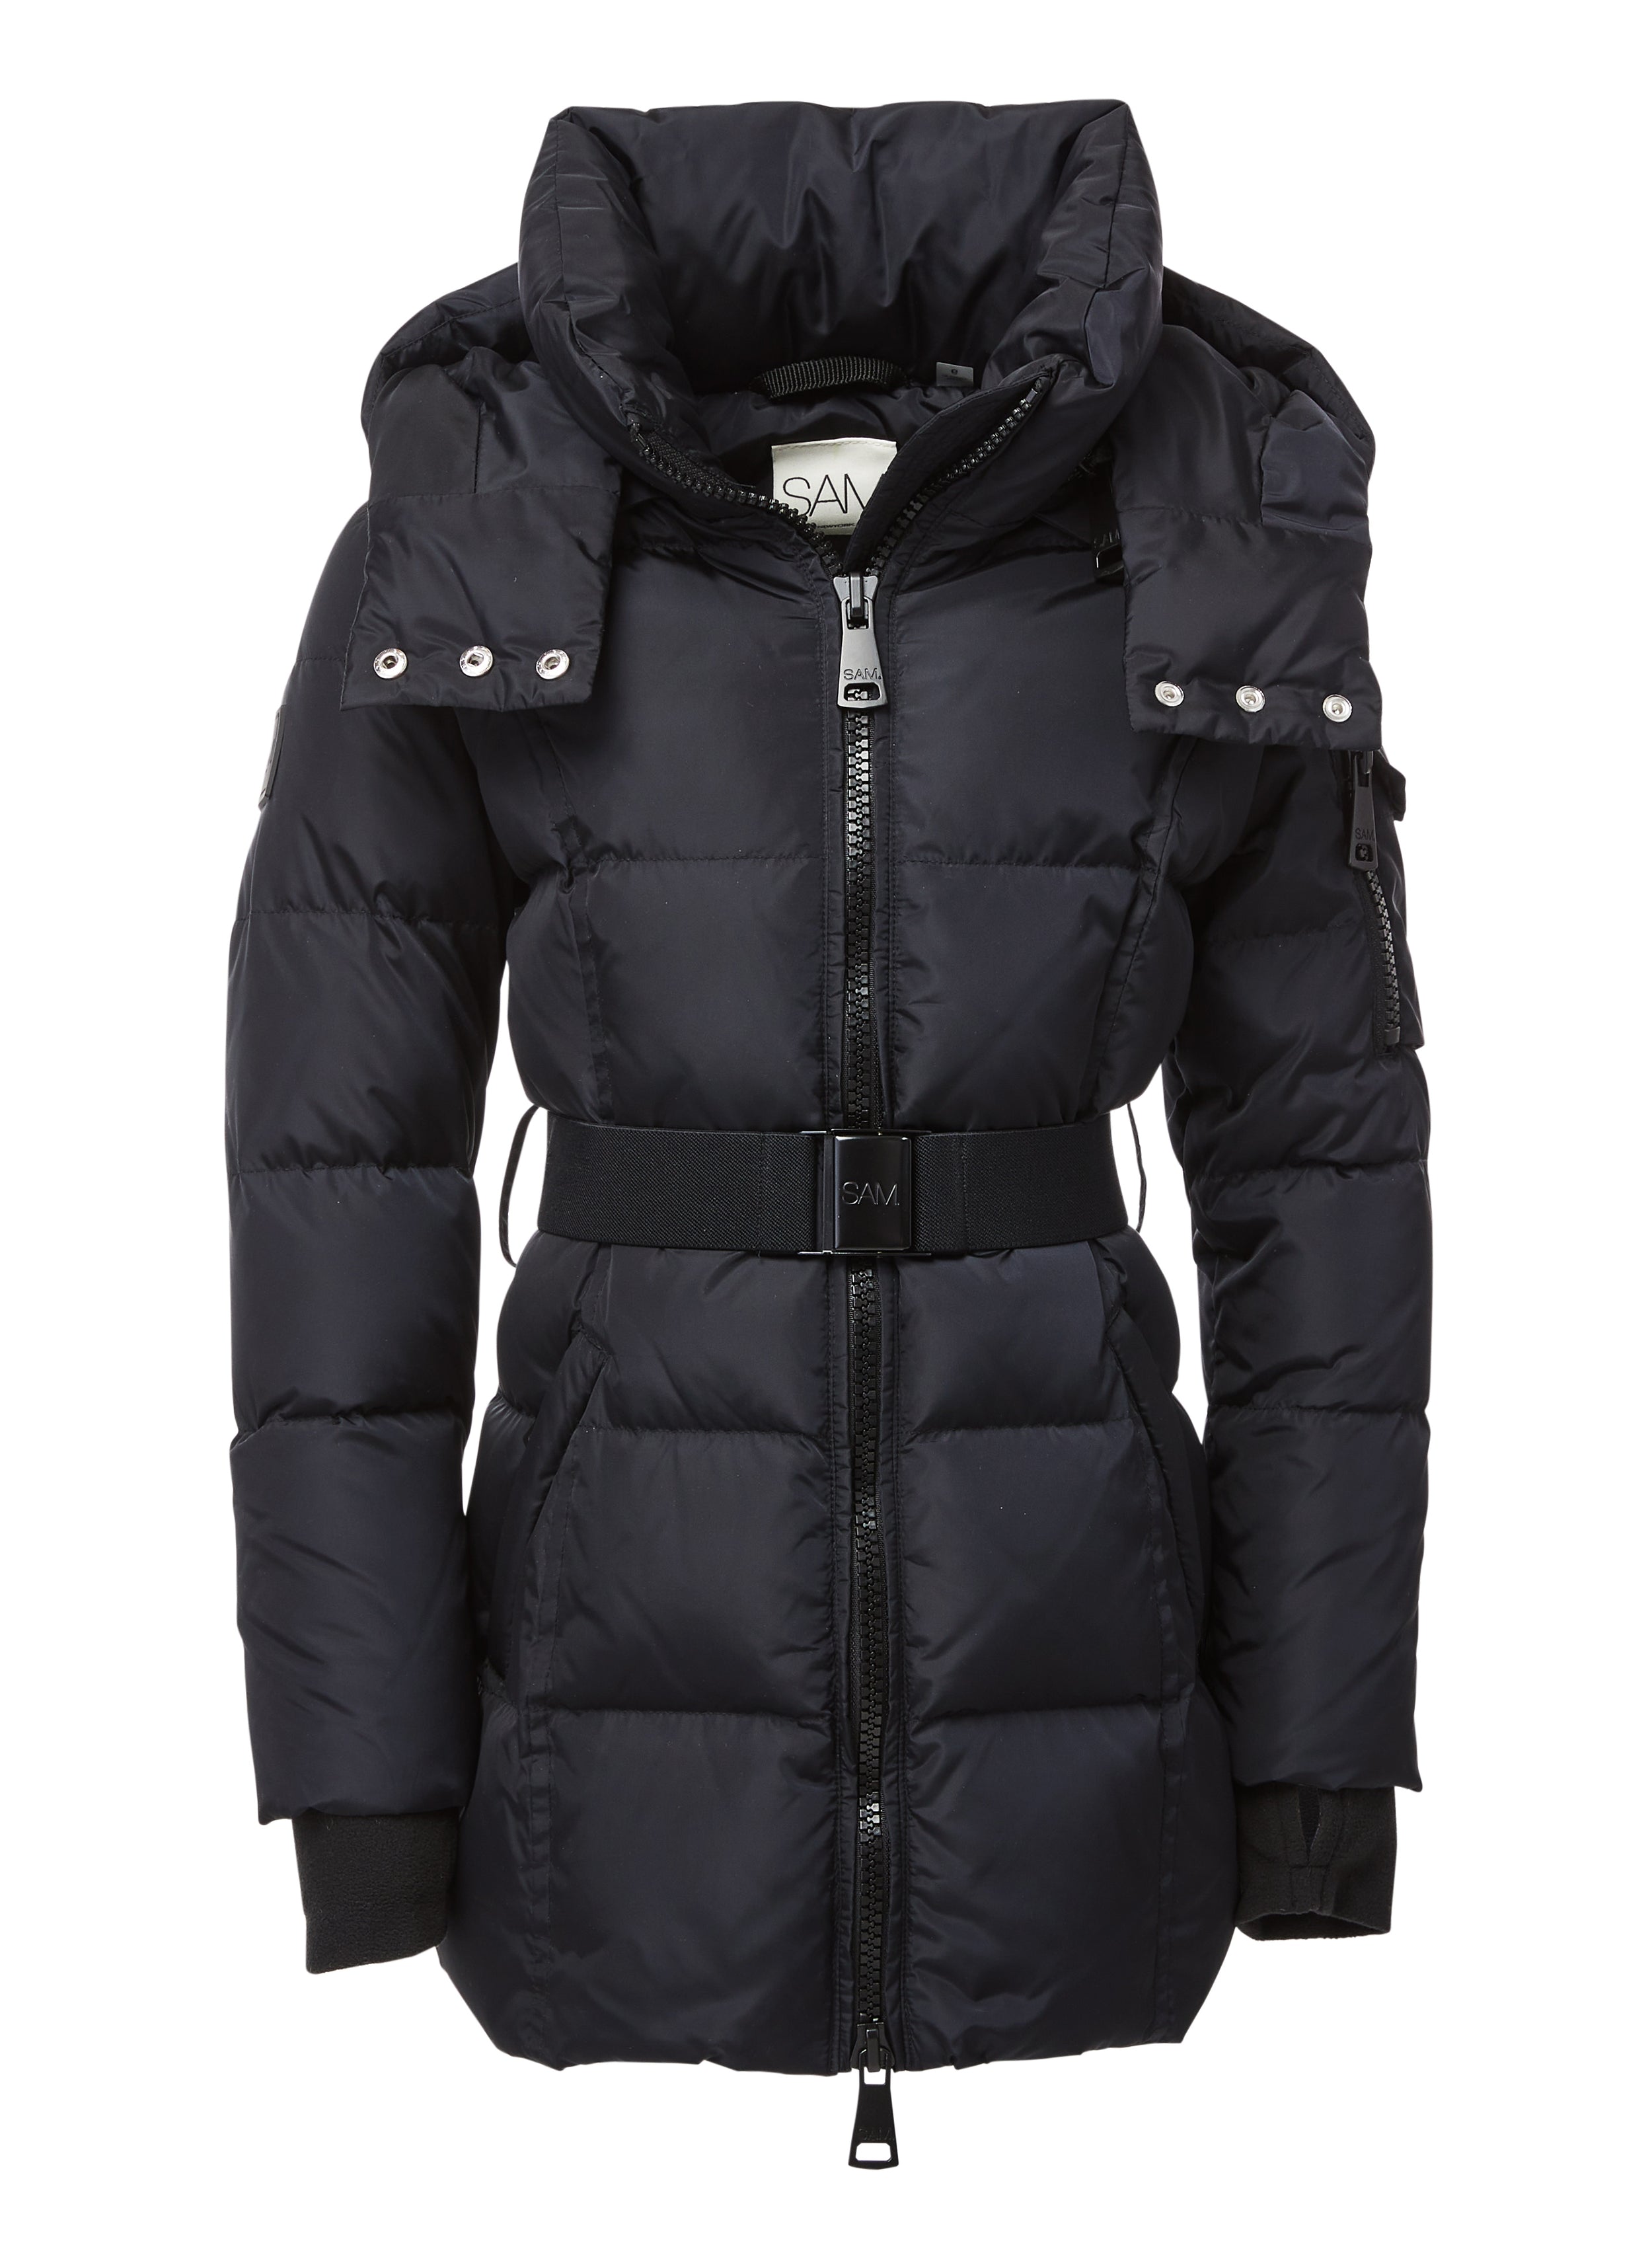 The 18 best kids winter coats to keep them warm in 2023